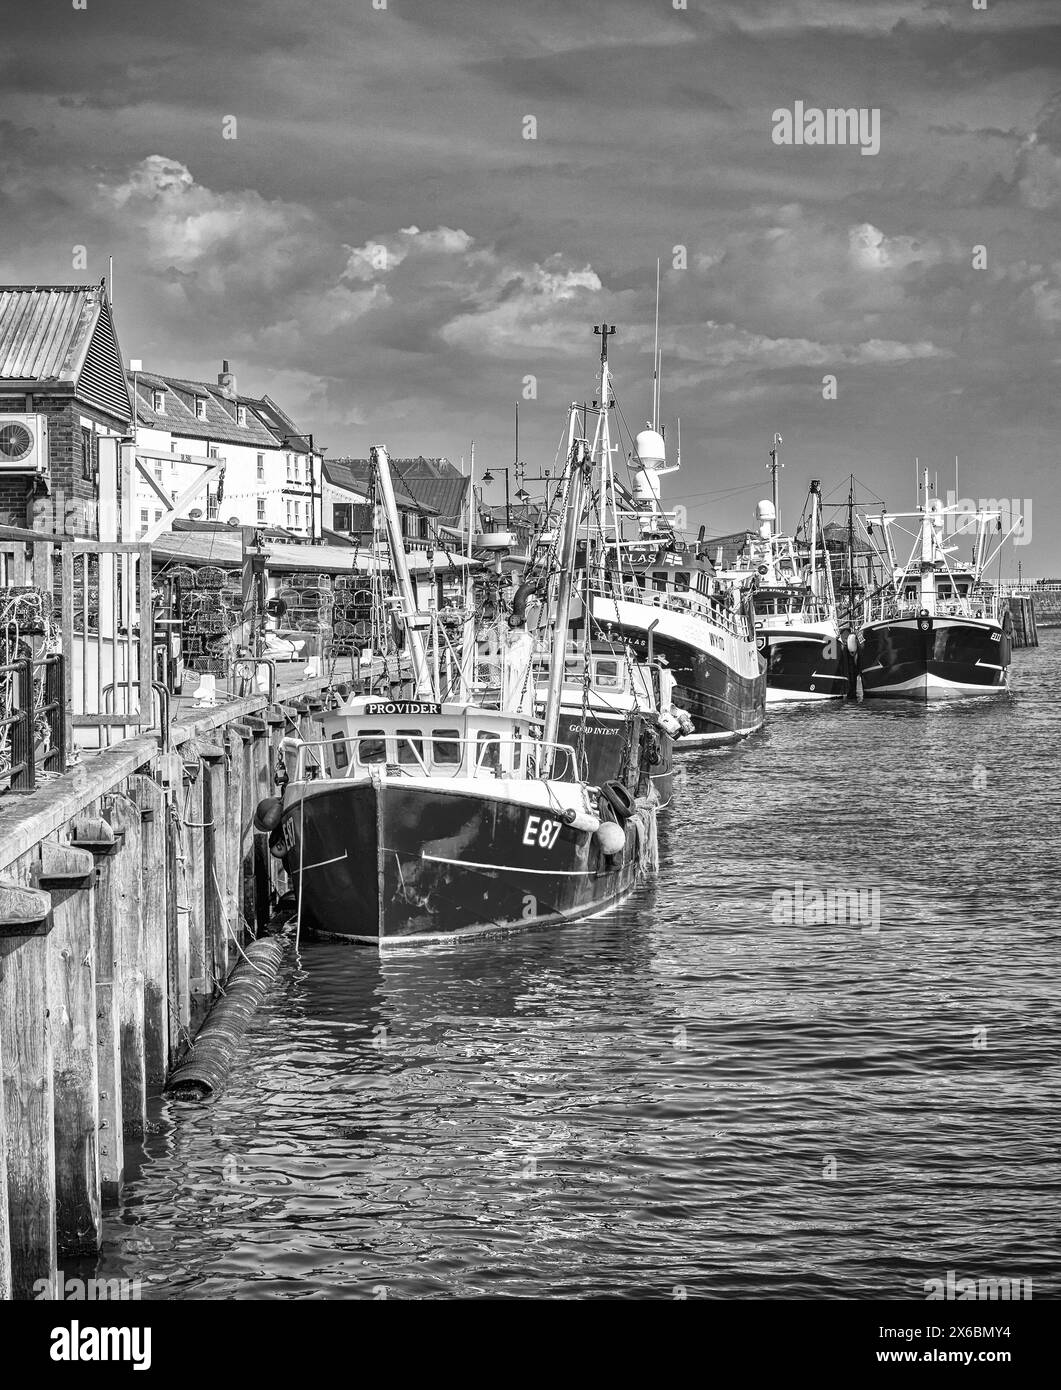 Whitby harbour with fishing boats moored alongside a wharf.  Buildings line the waterfront and a sky with clouds is above. Stock Photo